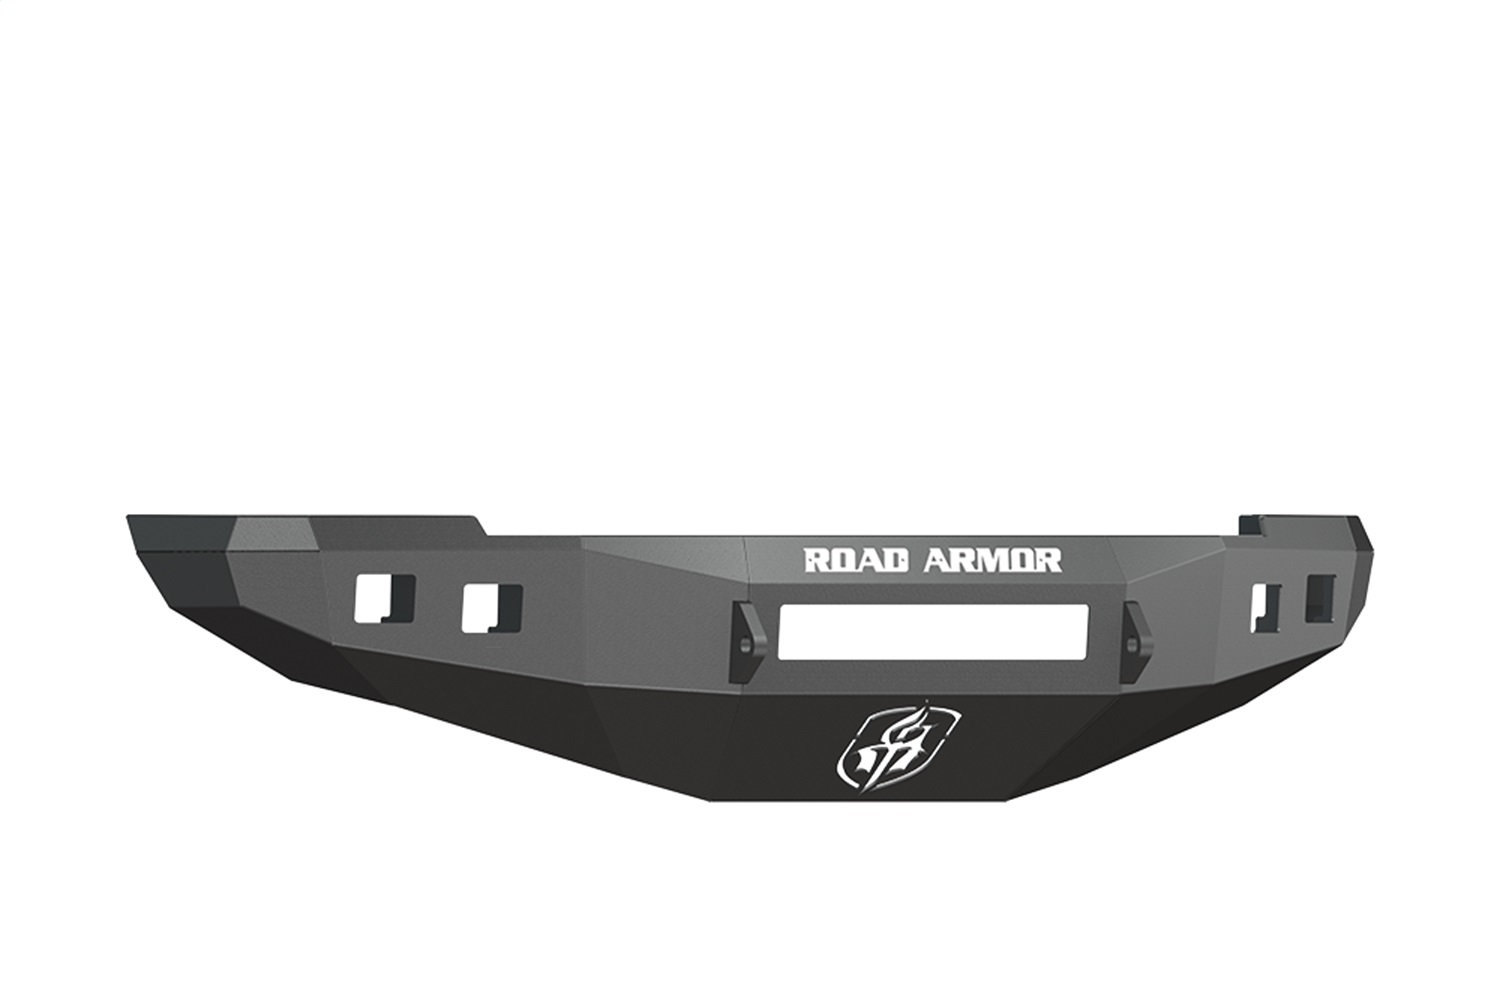 Road Armor Road Armor 408R0B-NW Front Stealth Bumper Fits 10-12 2500 3500 Ram 2500 Ram 3500